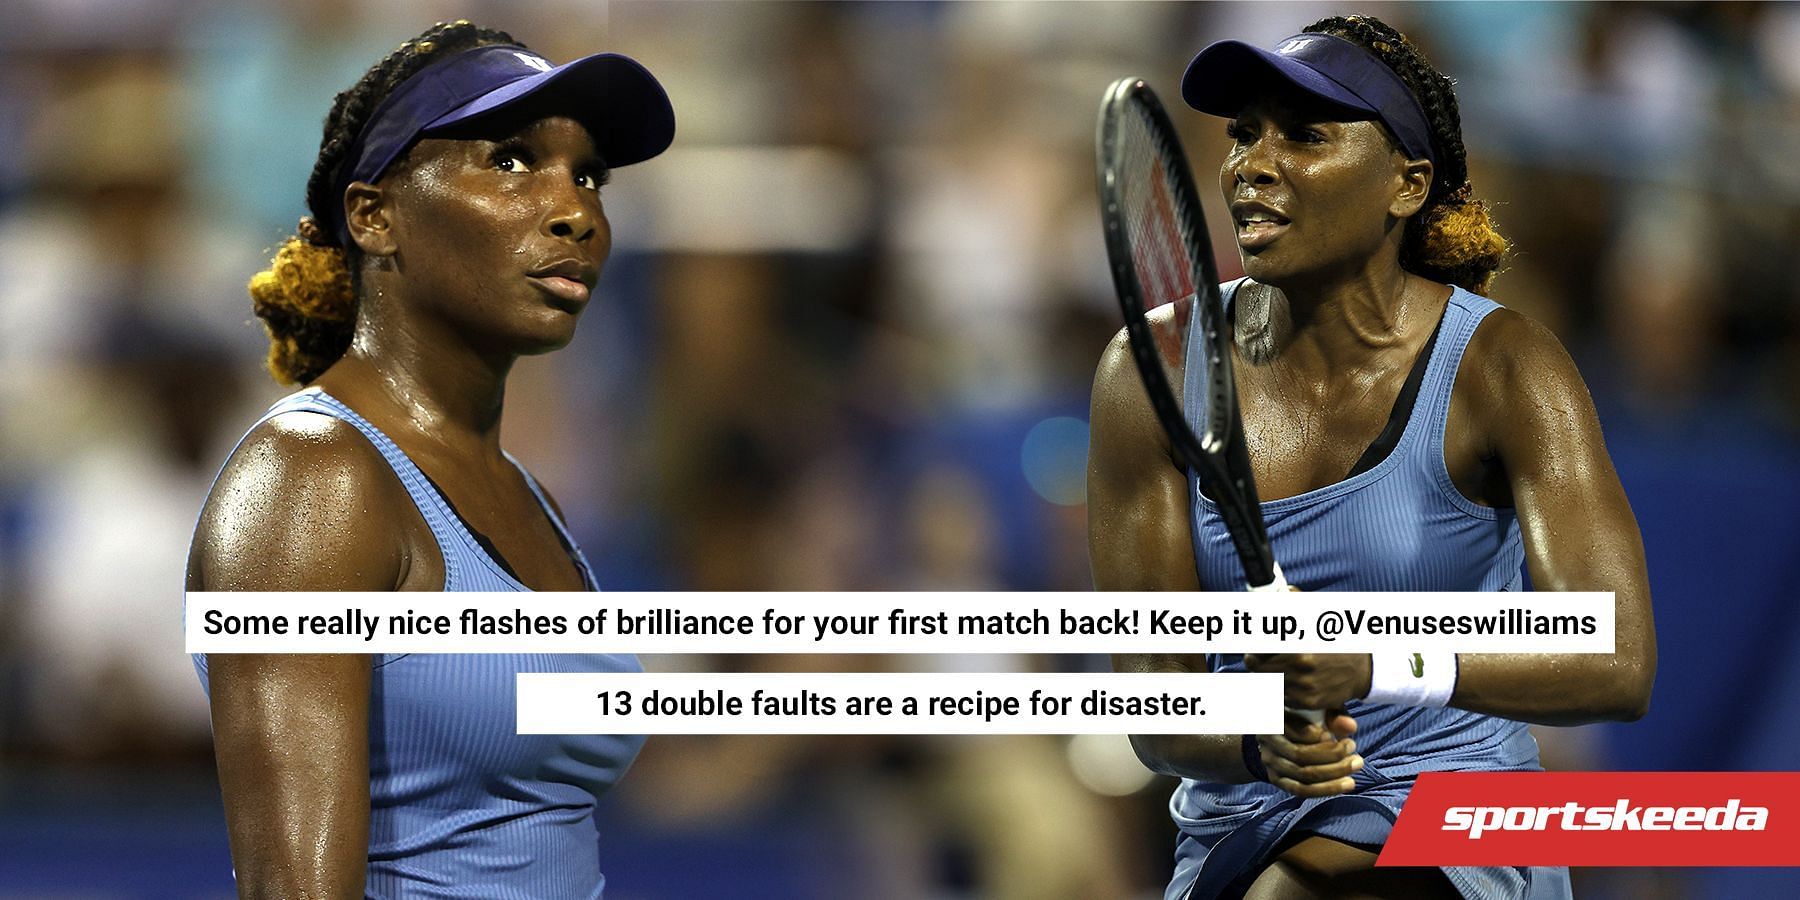 Venus Williams faced an early exit at the Citi Open